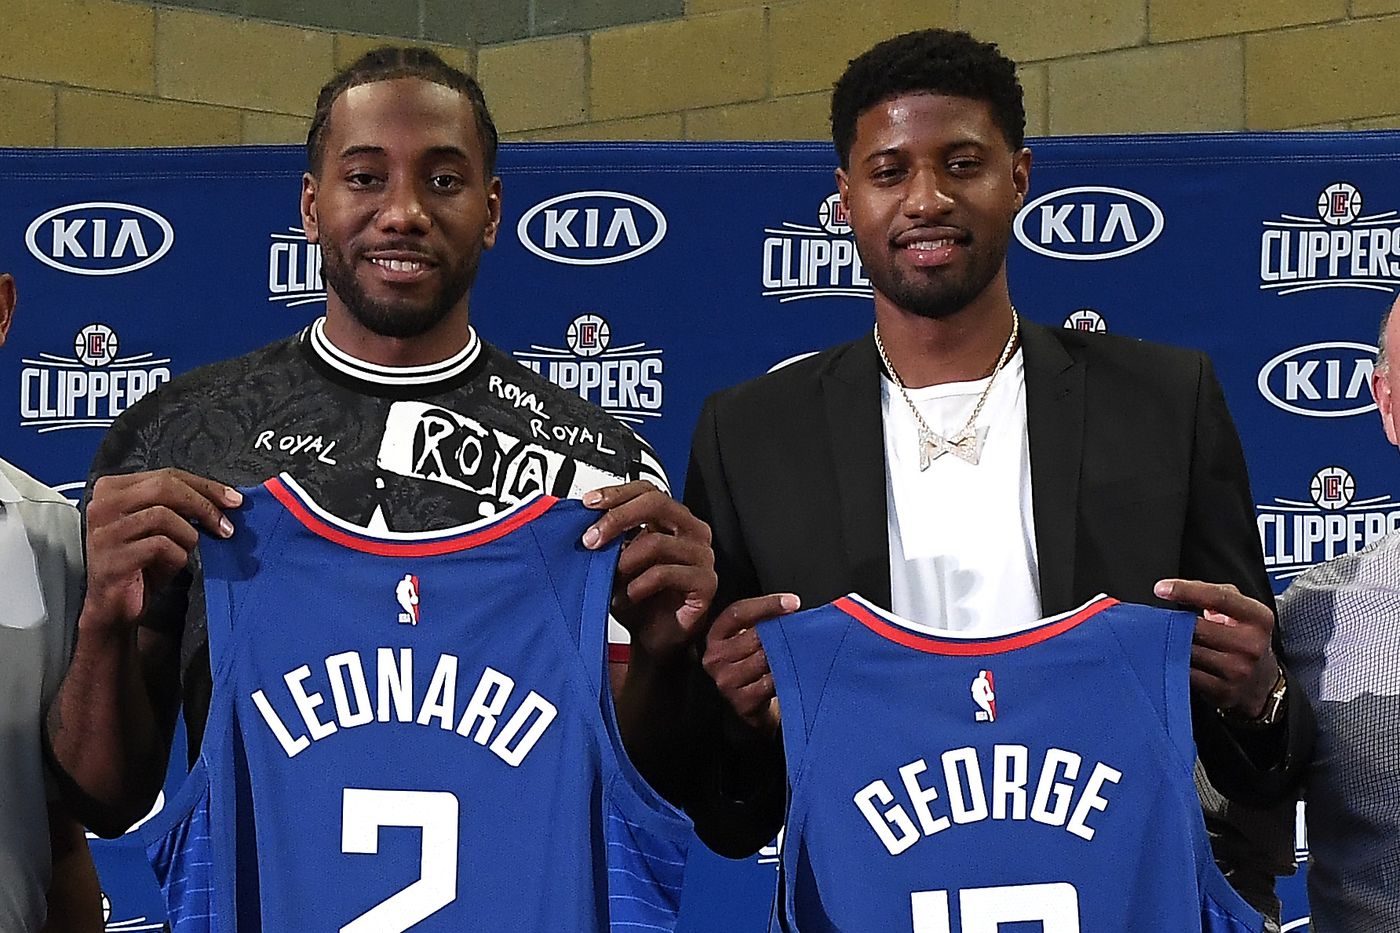 Where were you when Kawhi Leonard and Paul George became Clippers?